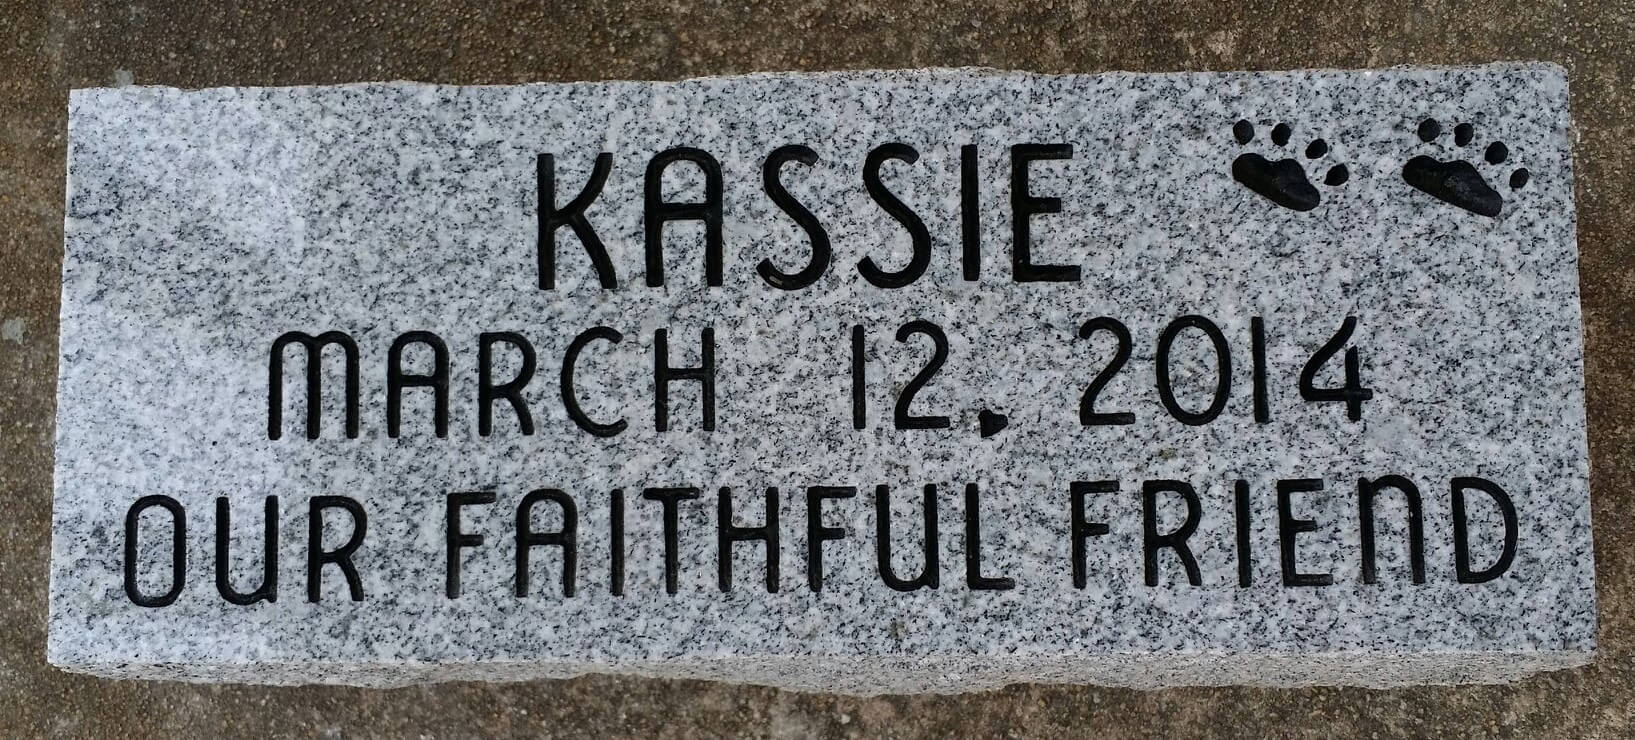 A memorial slab for the pet with the name Kassie